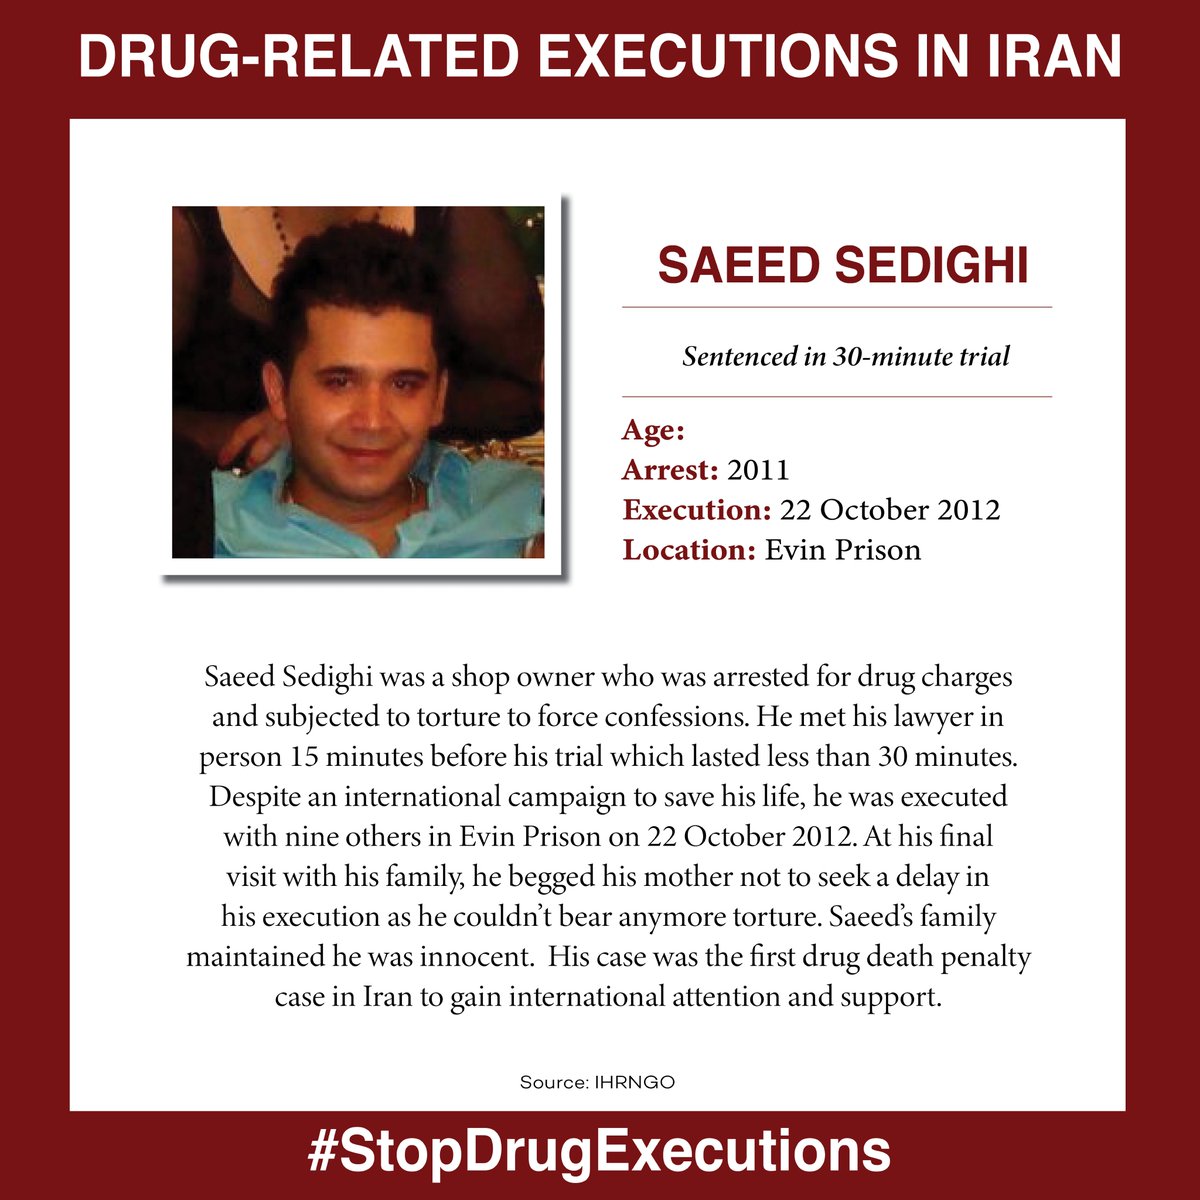 His name was #SaeedSedighi, the first drug death row defendant in Iran to gain international attention and support. For 12 days prior to his execution, he endured mock executions where the noose was place around his neck at dawn only to be told it had been postponed. He was